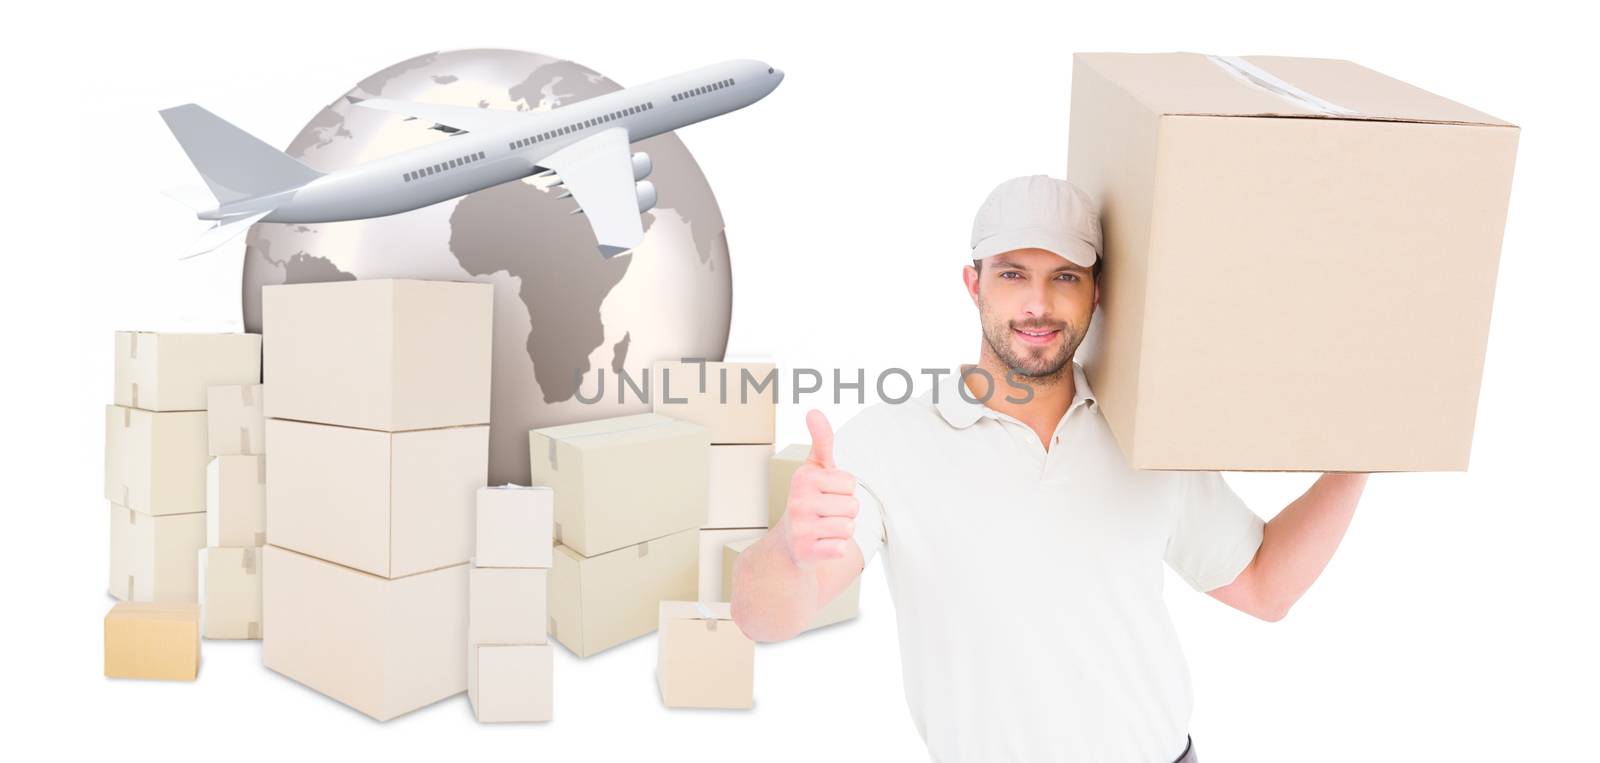 Delivery man with cardboard box gesturing thumbs up  against logistics concept